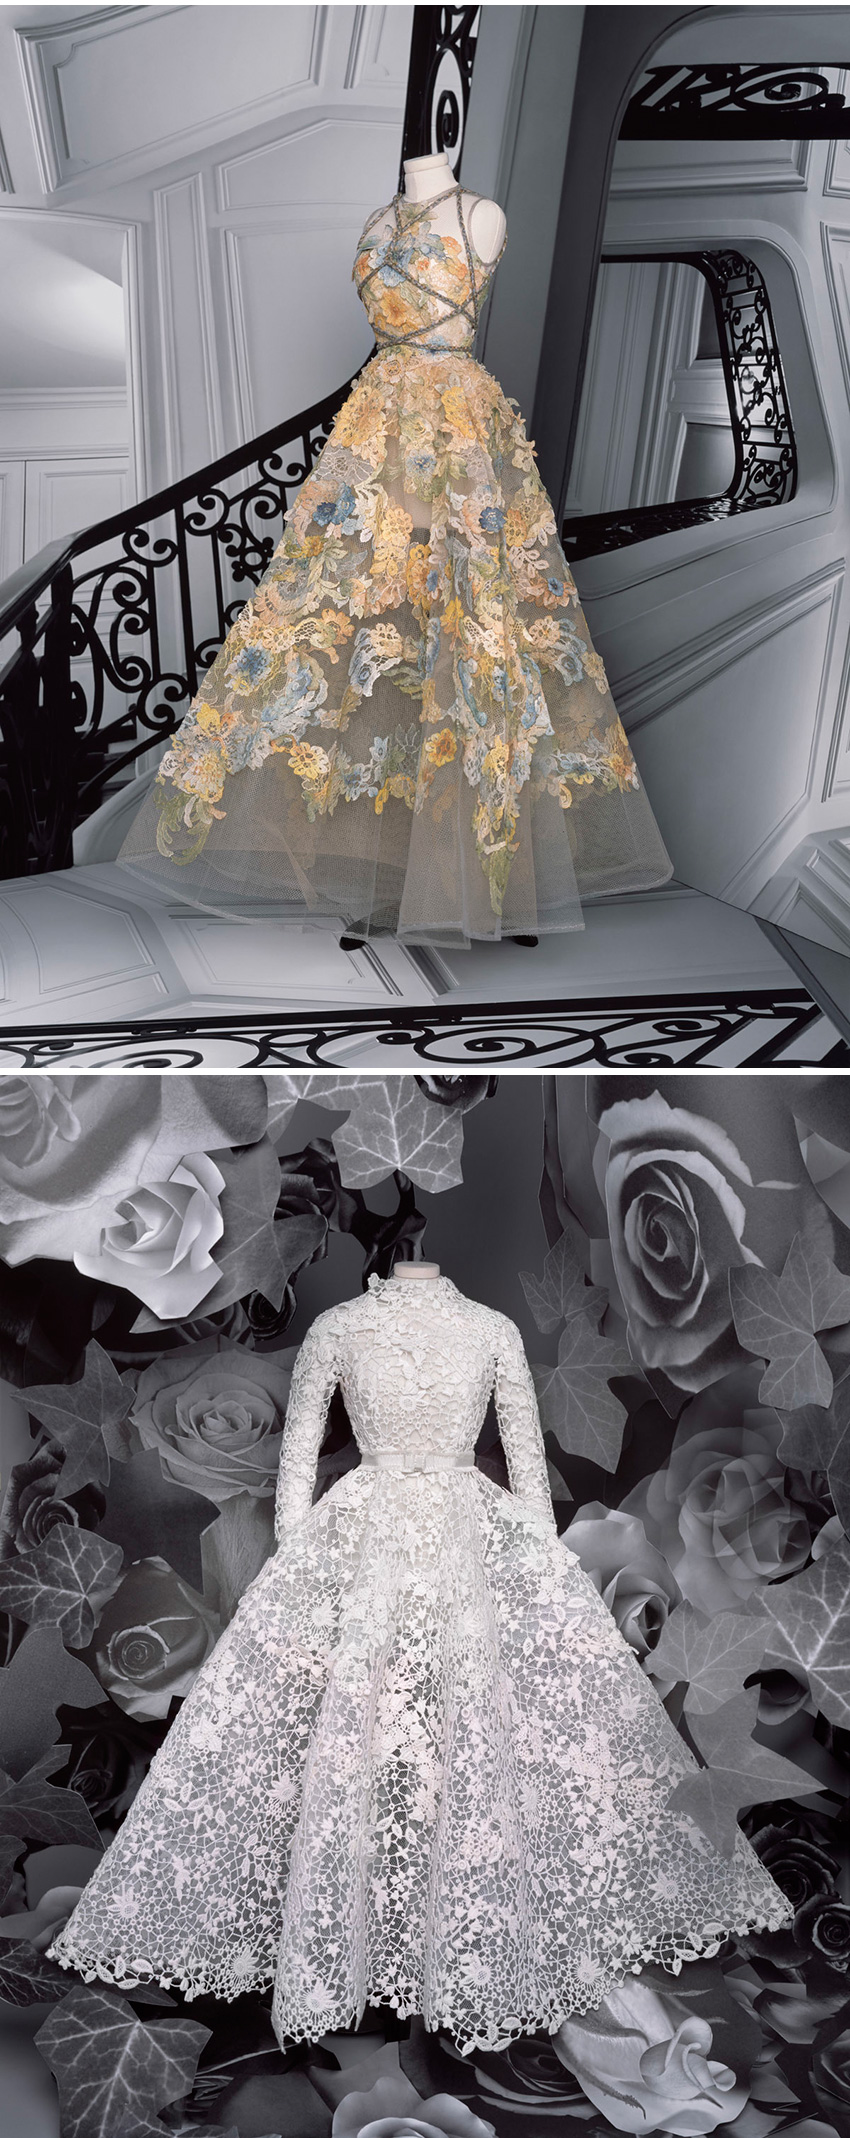 Dior Haute Couture F/W 2020-21 collection produced entirely by hand featured in Perfect Wedding Magazine